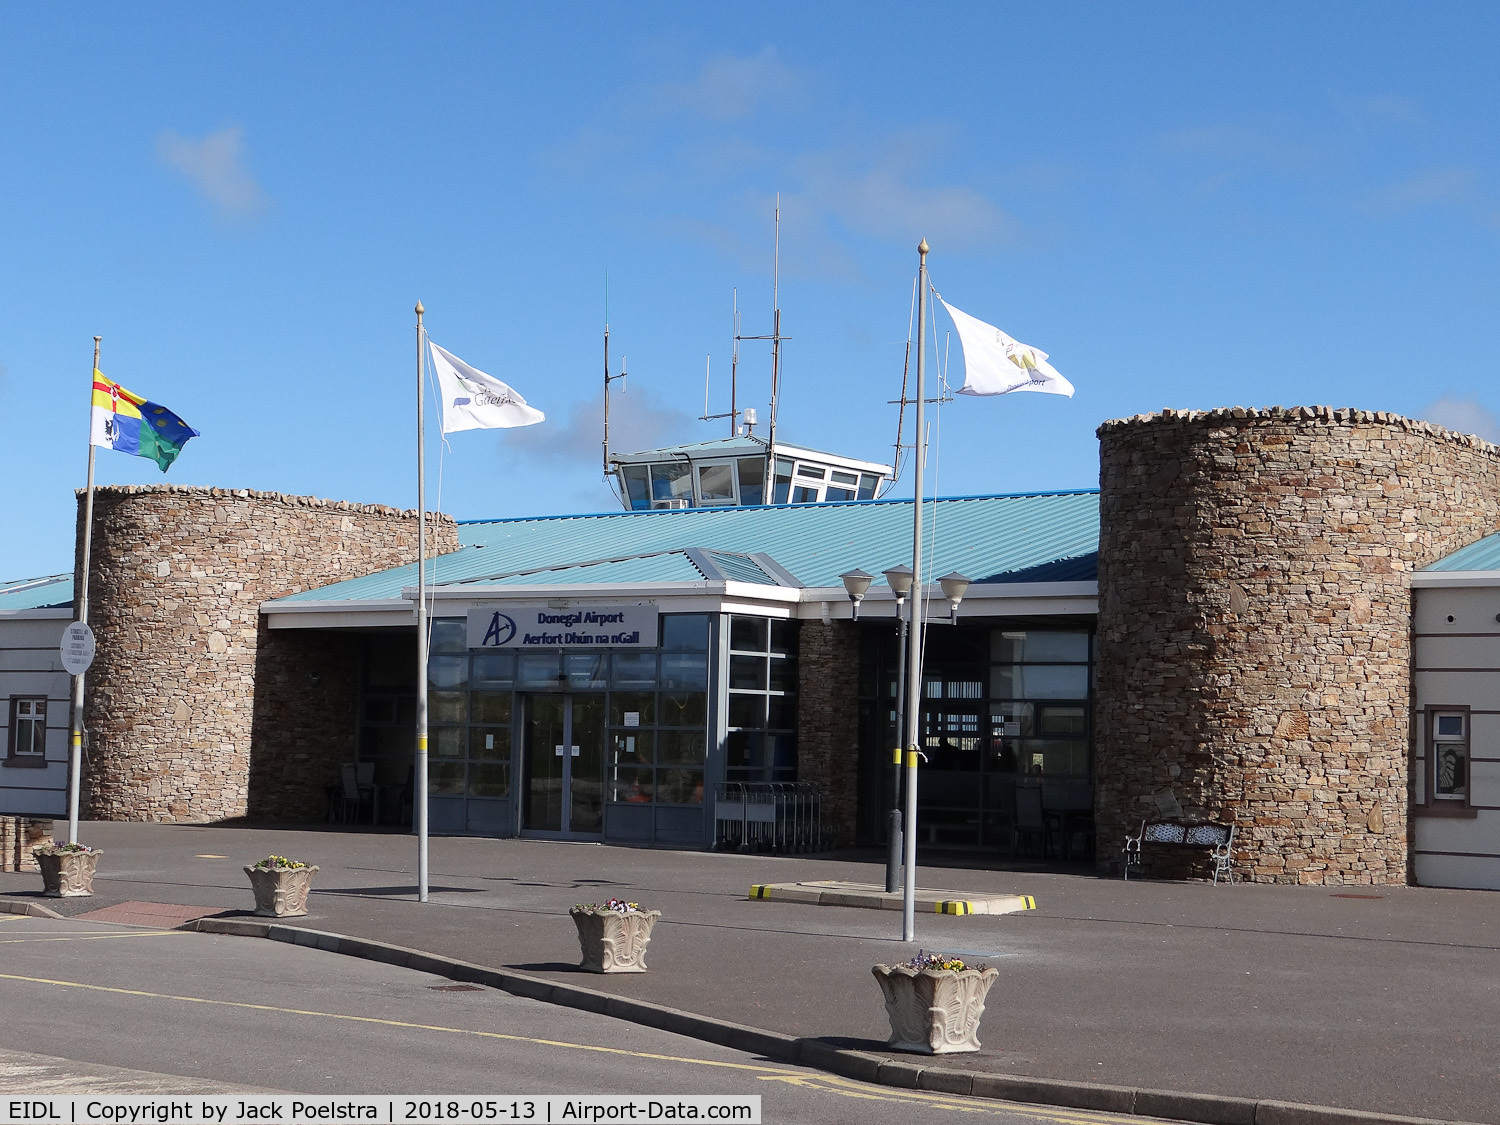 Donegal Airport, Carrickfinn, County Donegal Ireland (EIDL) - Passenger terminal of Donegal Airport Ireland